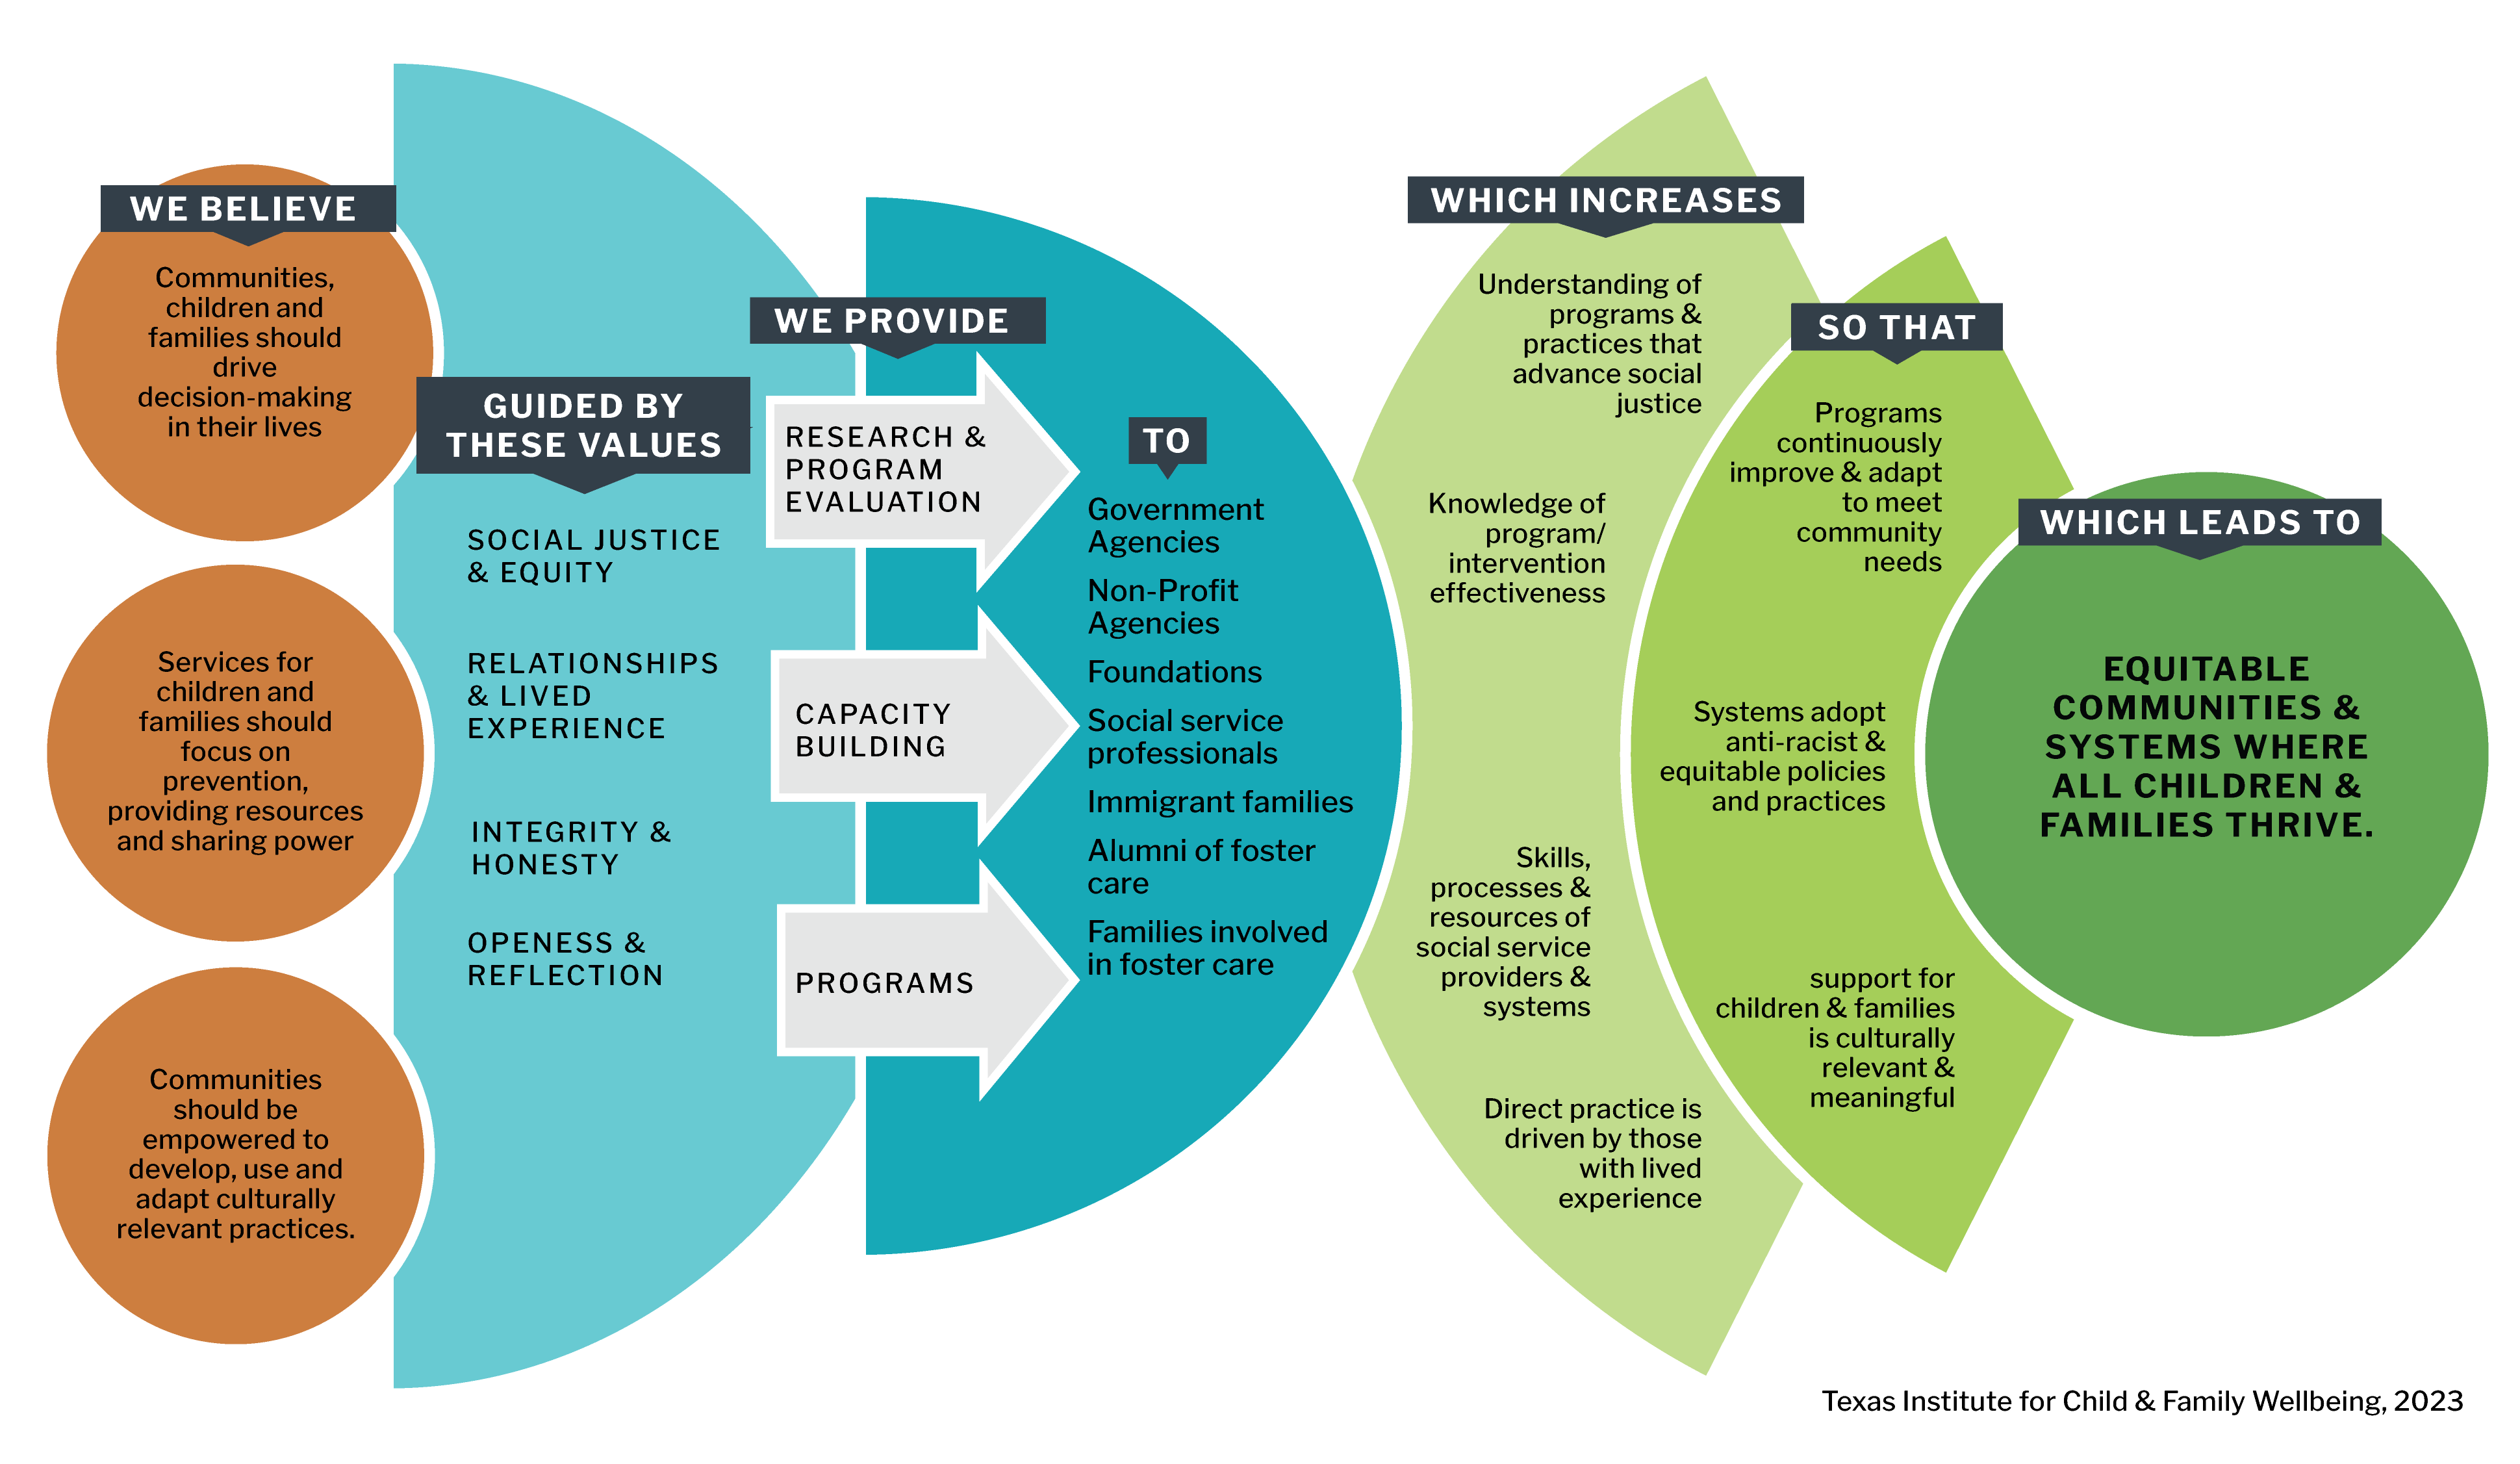 TXICFW Theory of Change graphic